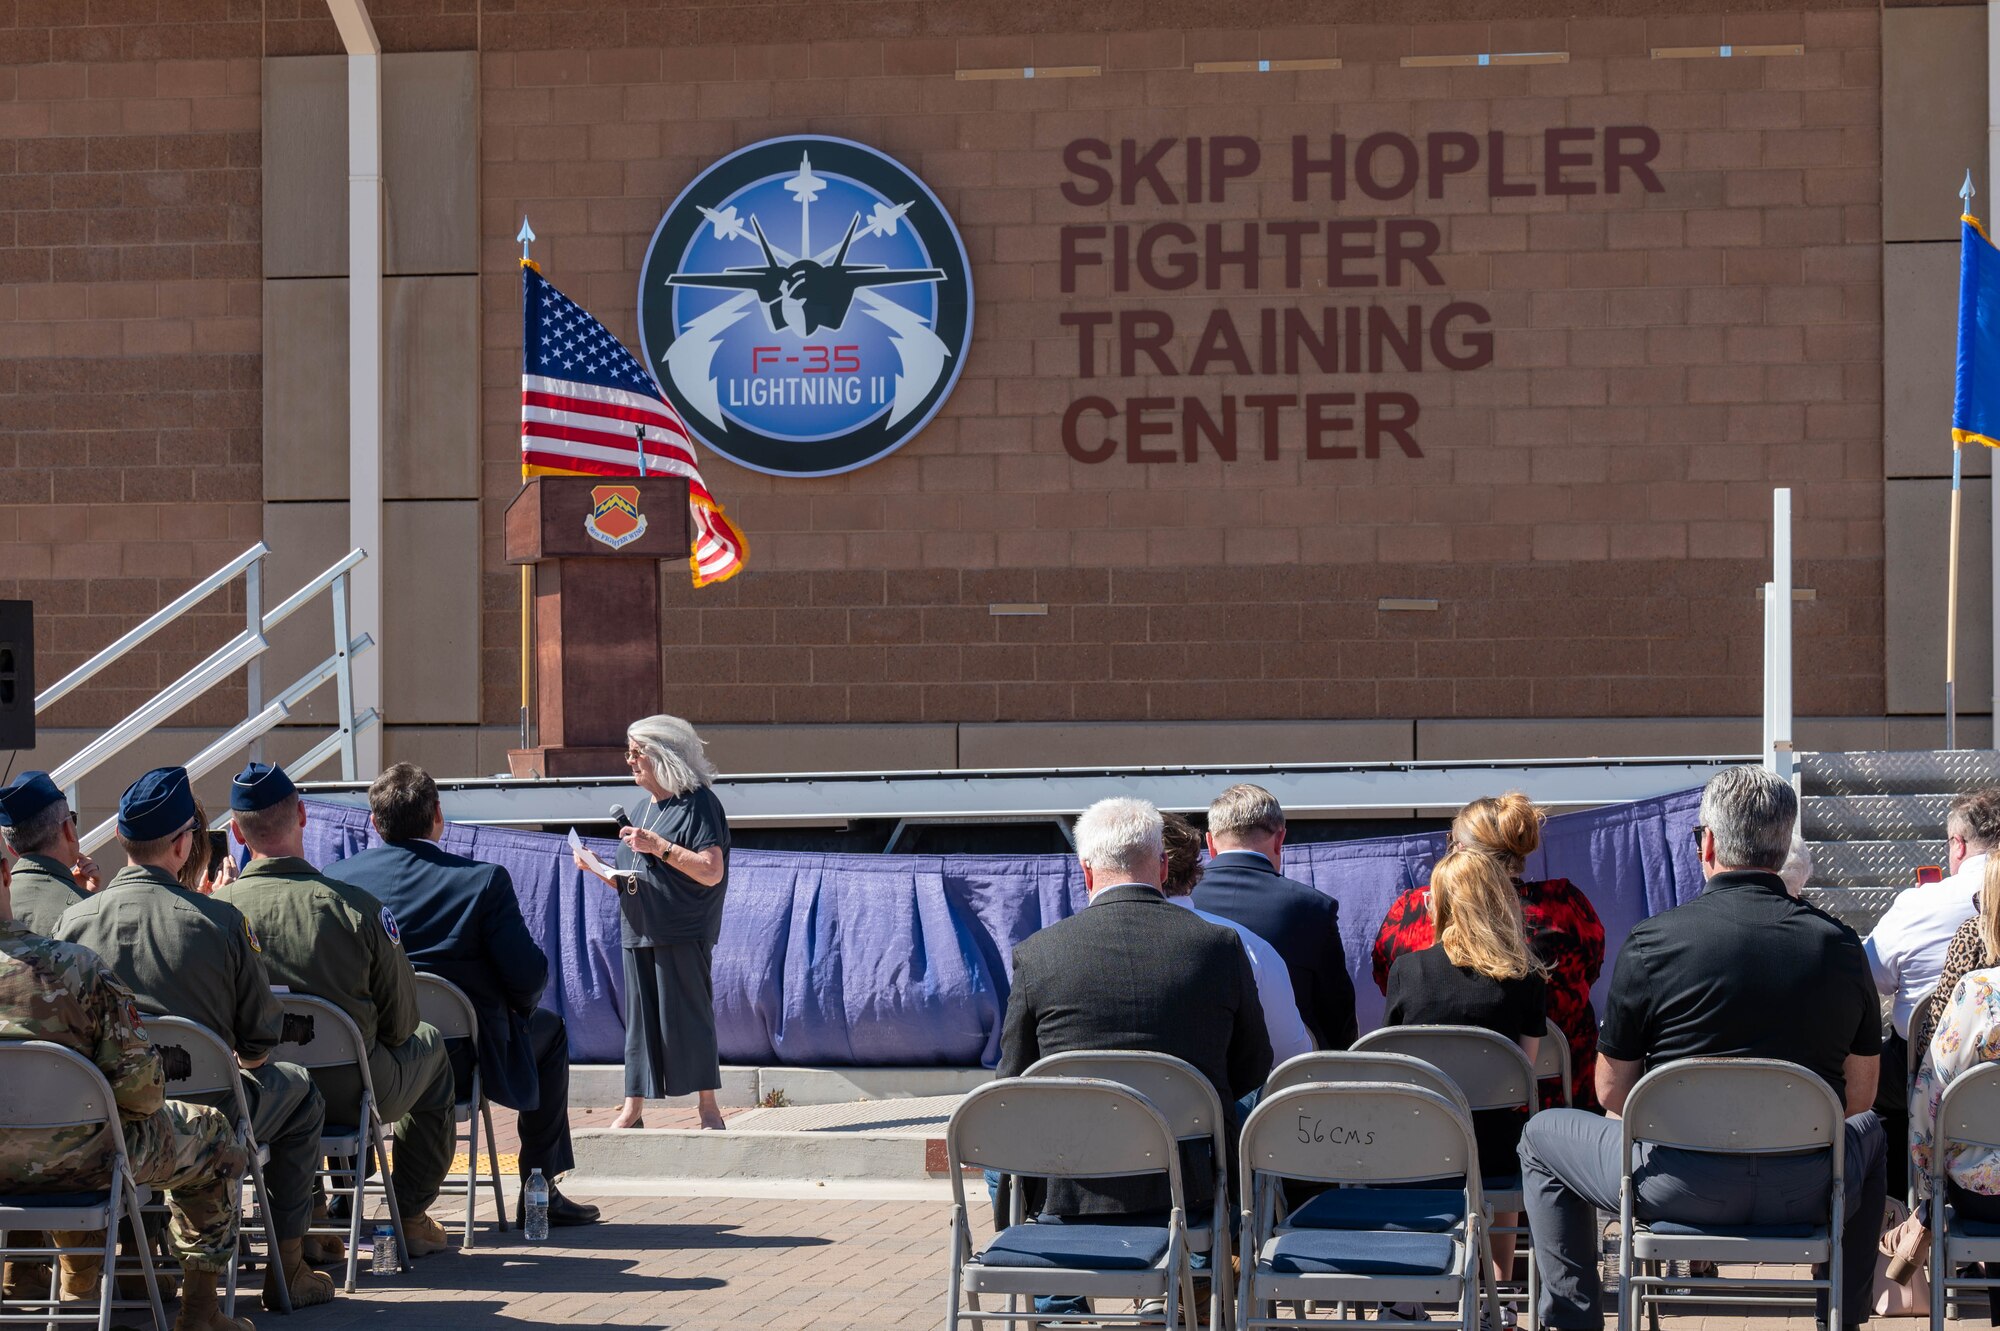 Heather Hopler, widow of U.S. Air Force retired Lt. Col. Edwin “Skip” Hopler, gives remarks during a renaming ceremony for the newly deemed Skip Hopler Fighter Training Center, March 29, 2024, at Luke Air Force Base, Arizona.